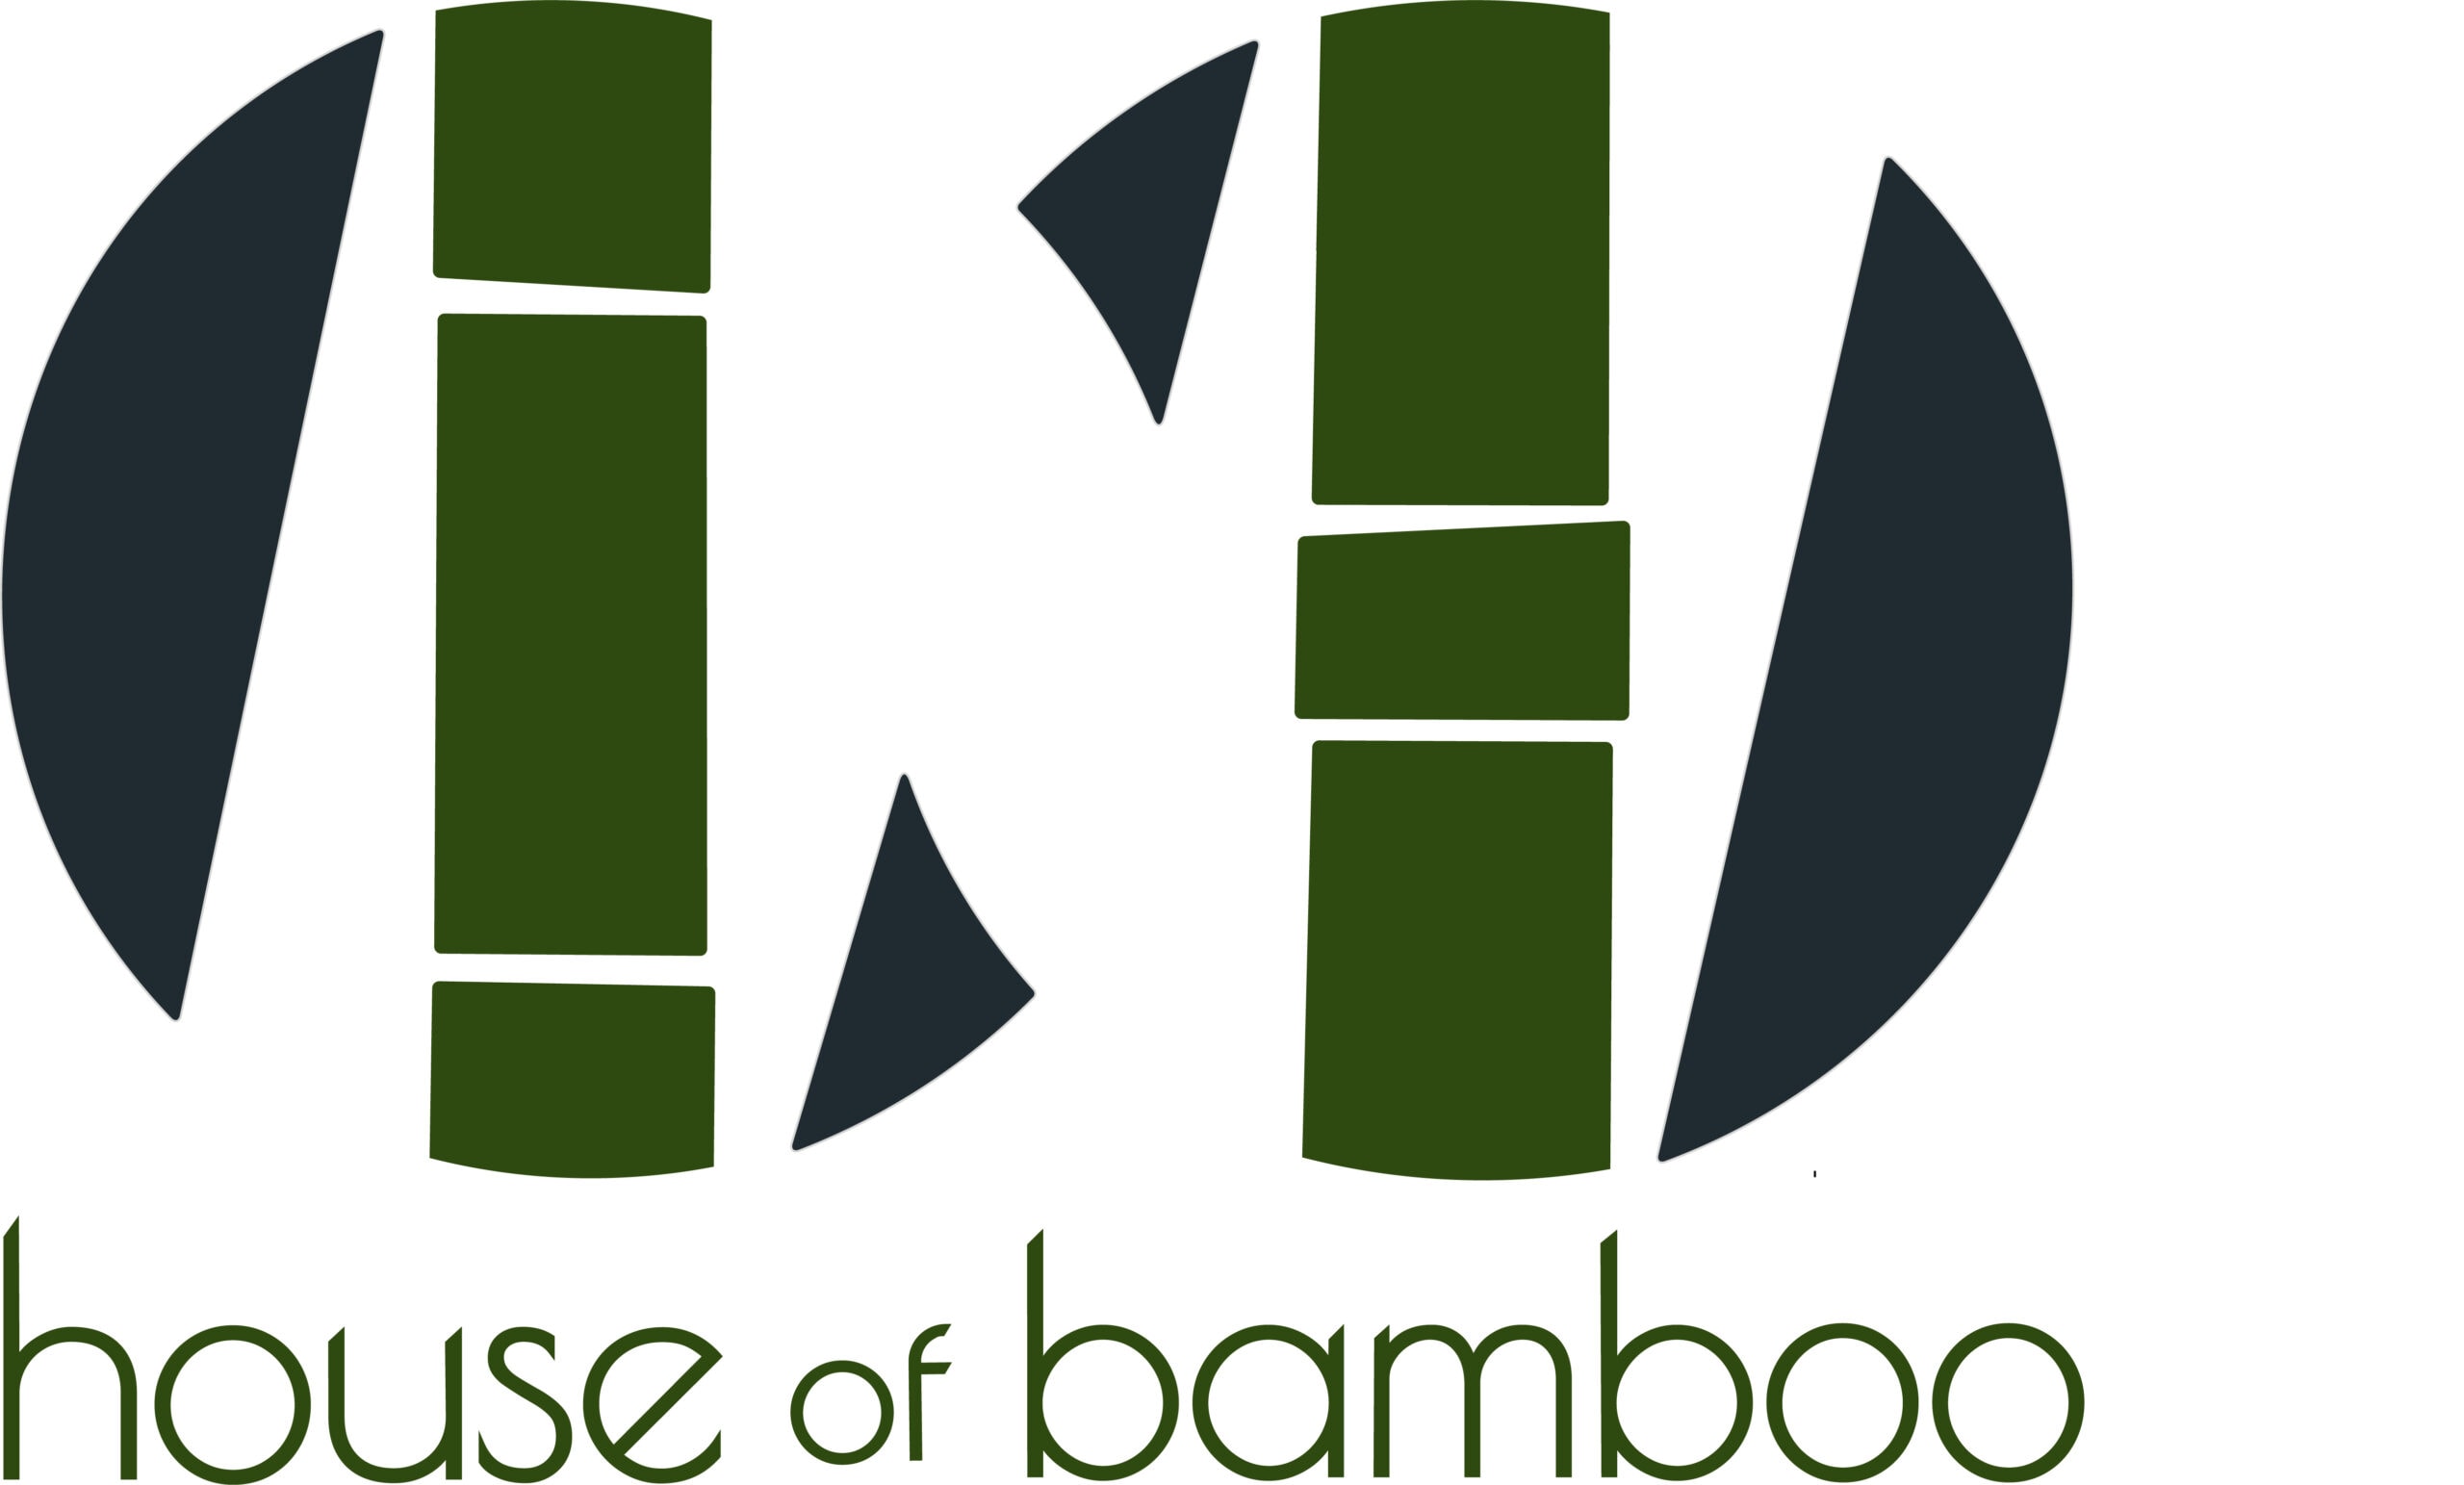 House of Bamboo